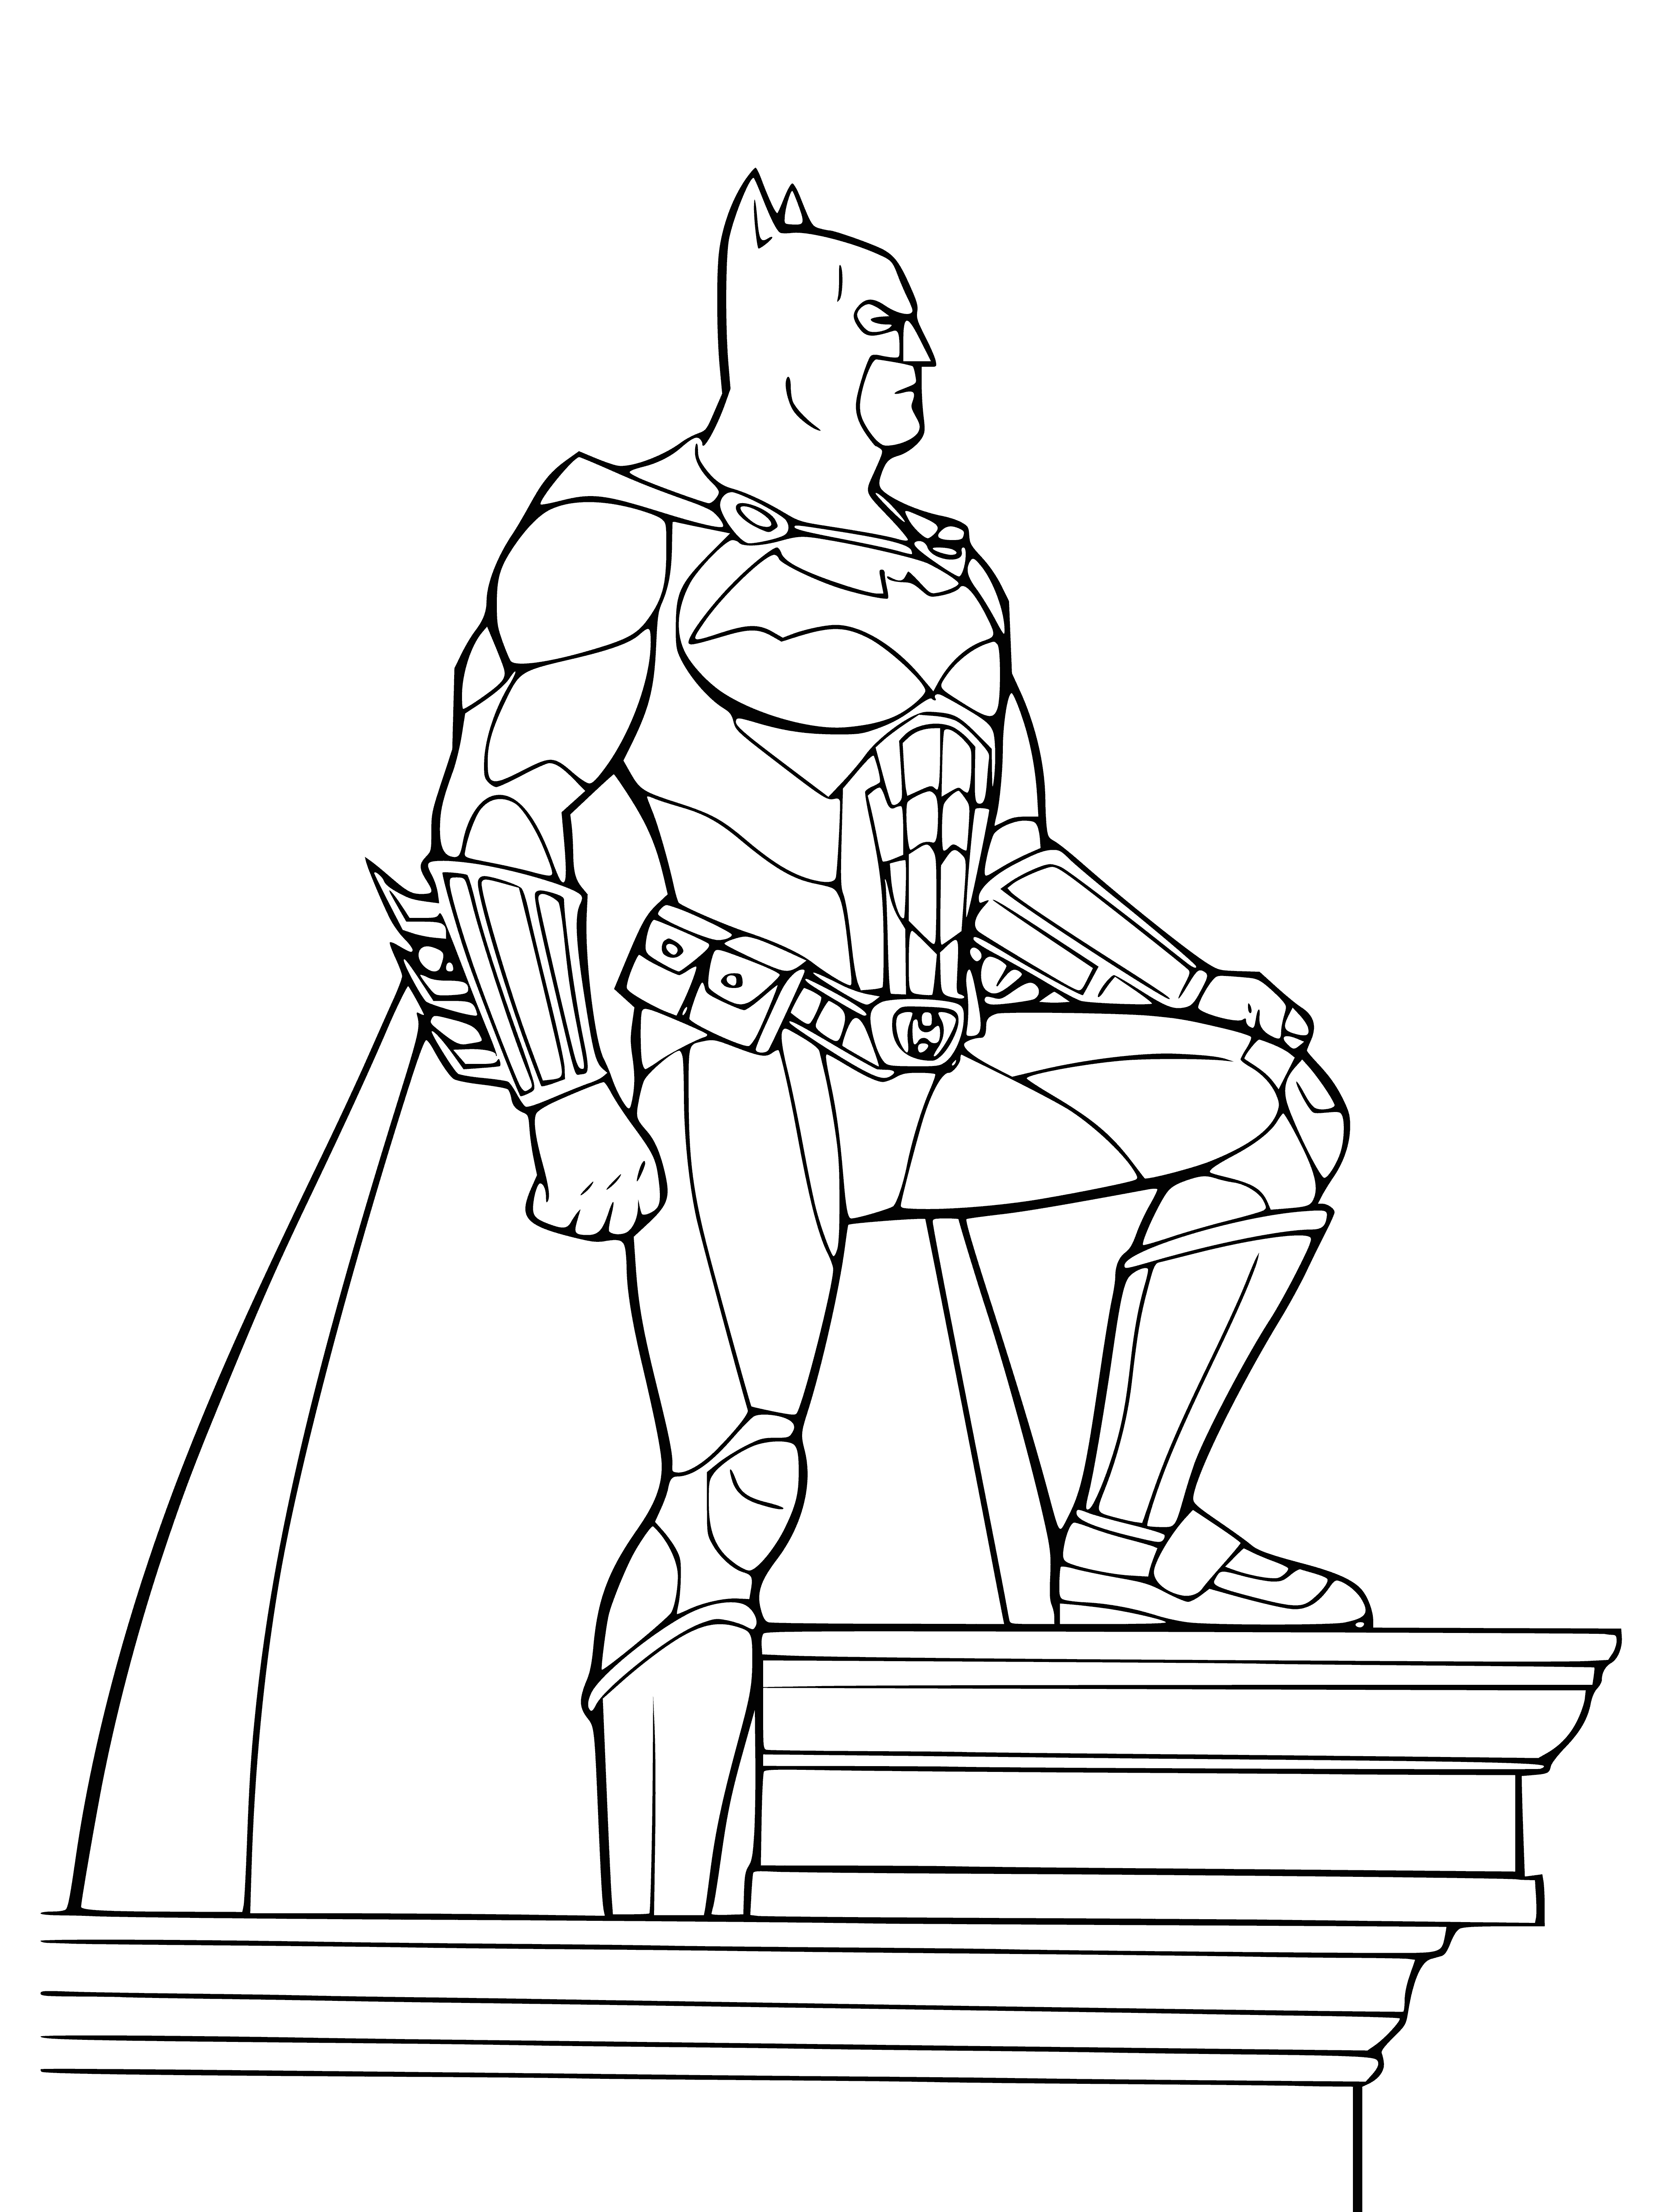 coloring page: Mysterious figure stands atop a building, cape billowing in the wind, goggles concealing their eyes, ready to act.